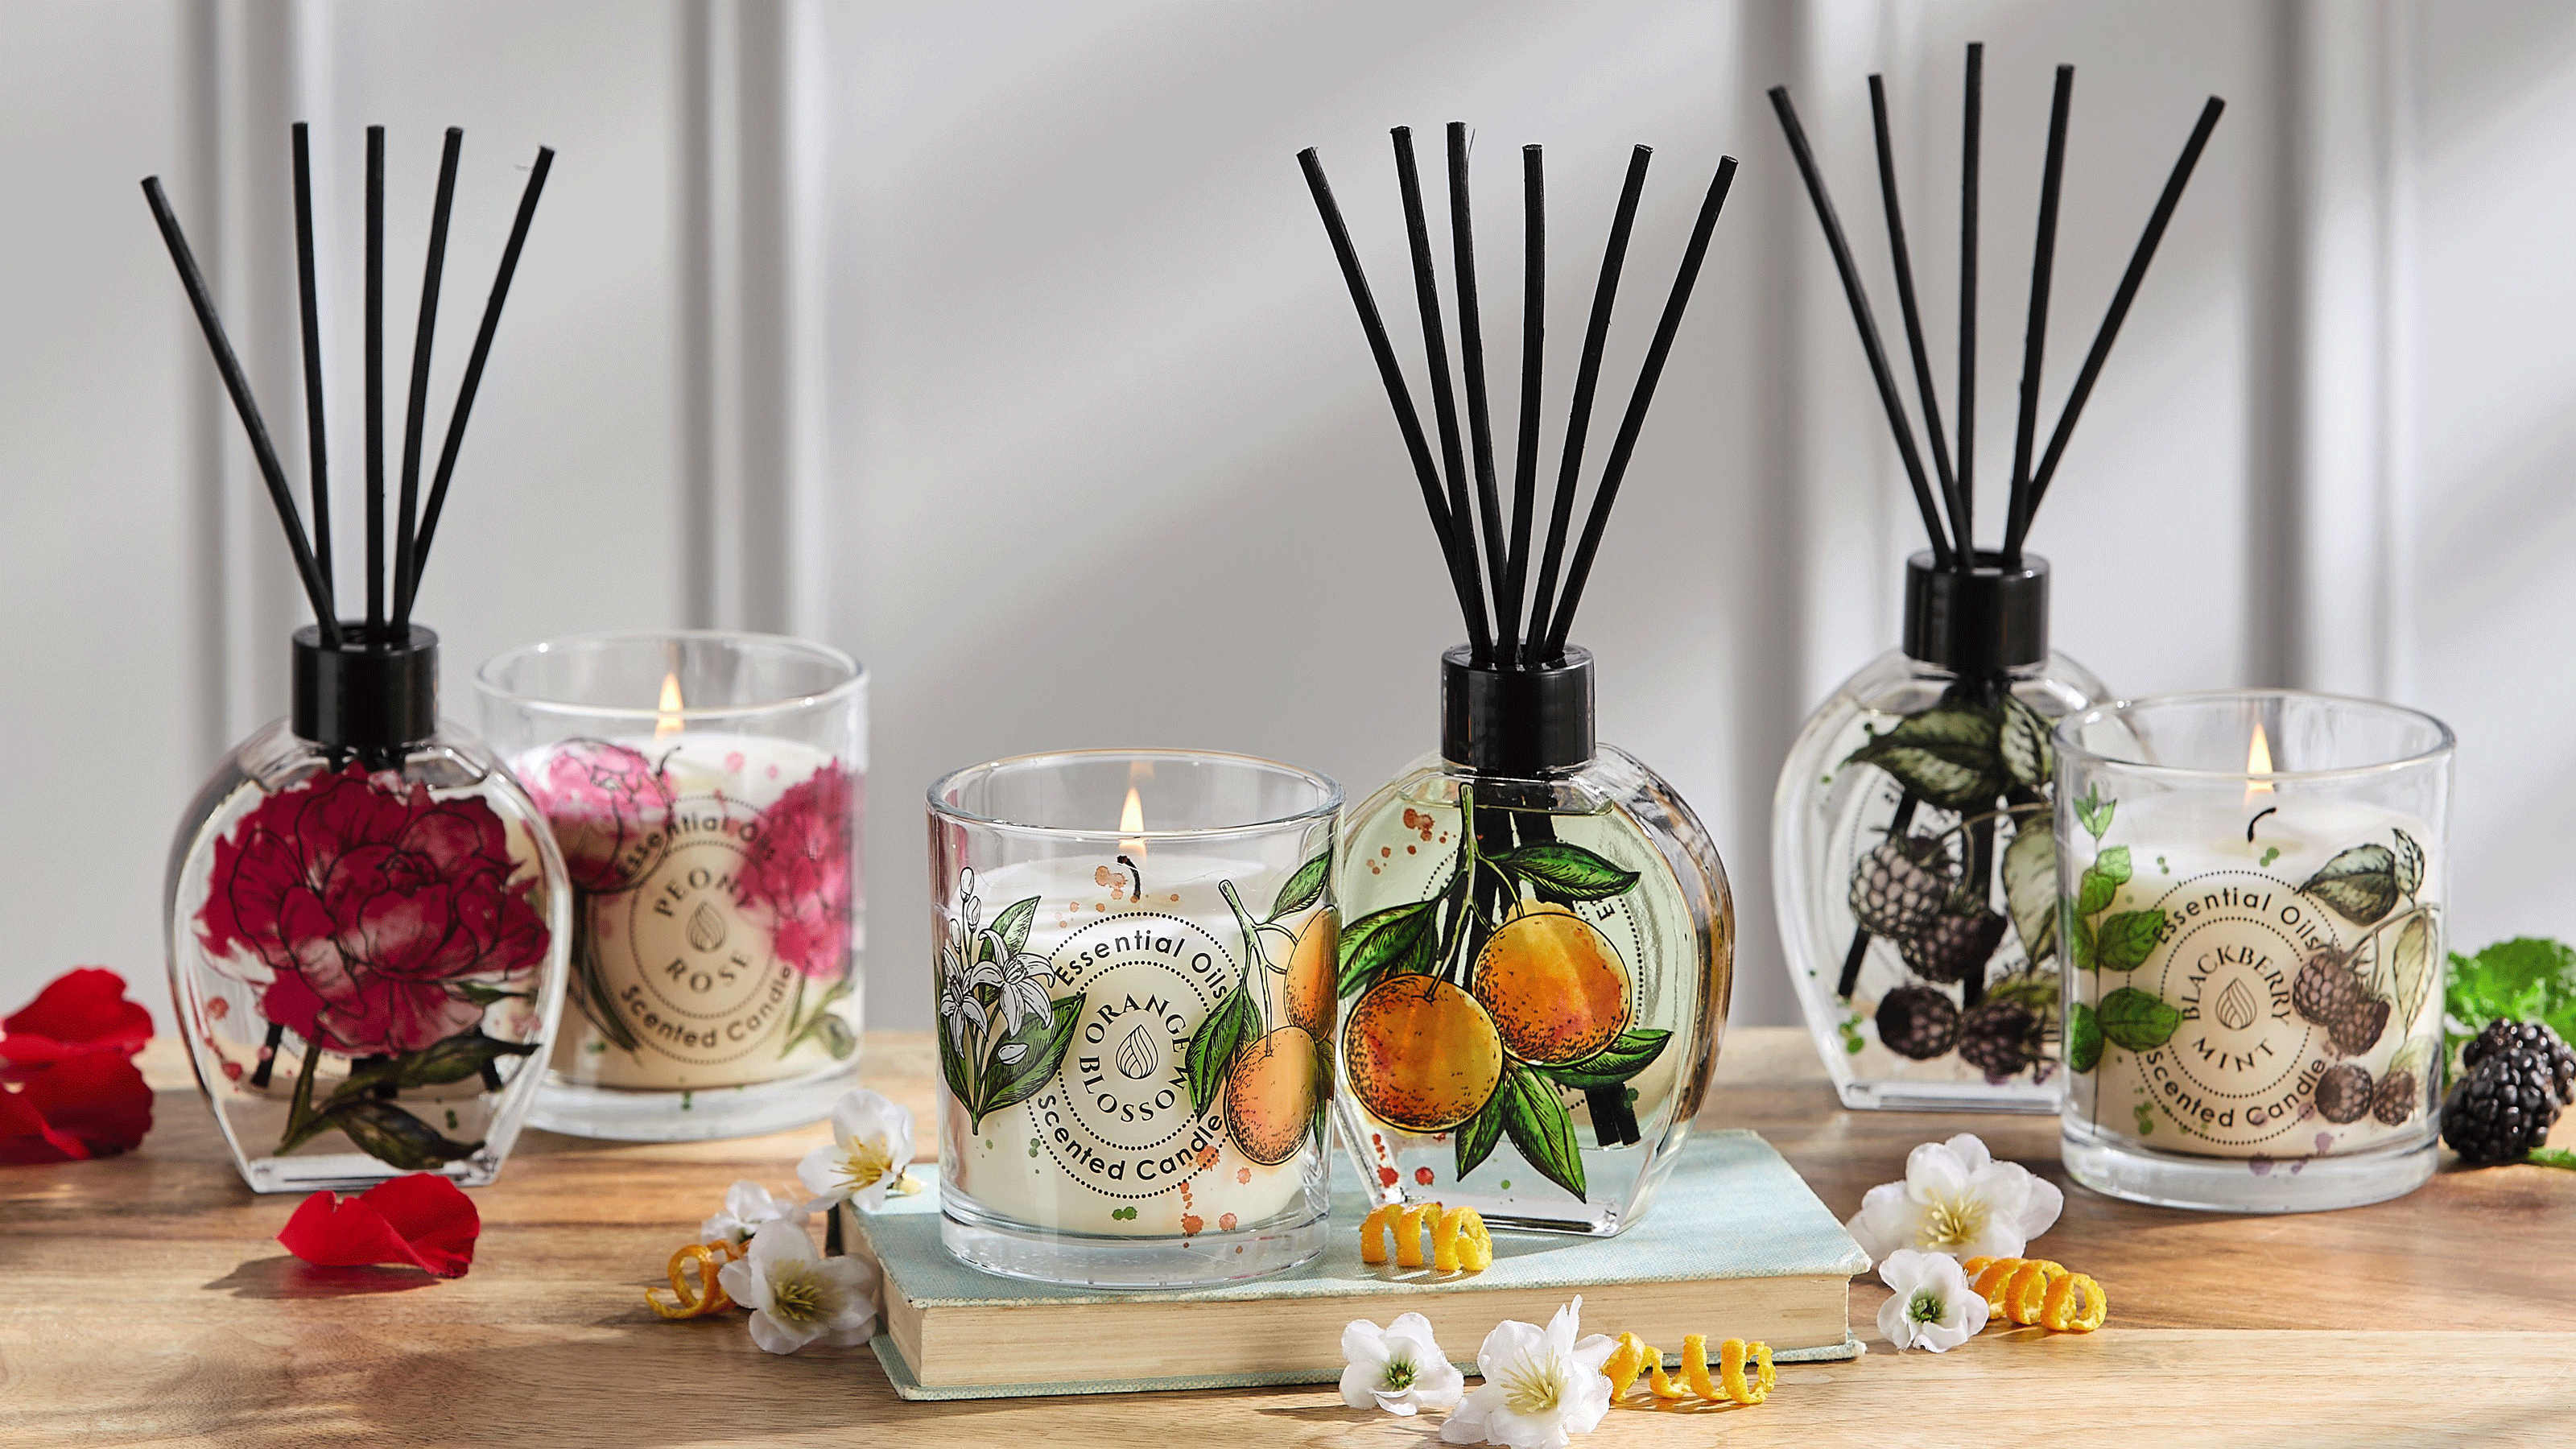 Aldi candle with floral and fruit motif